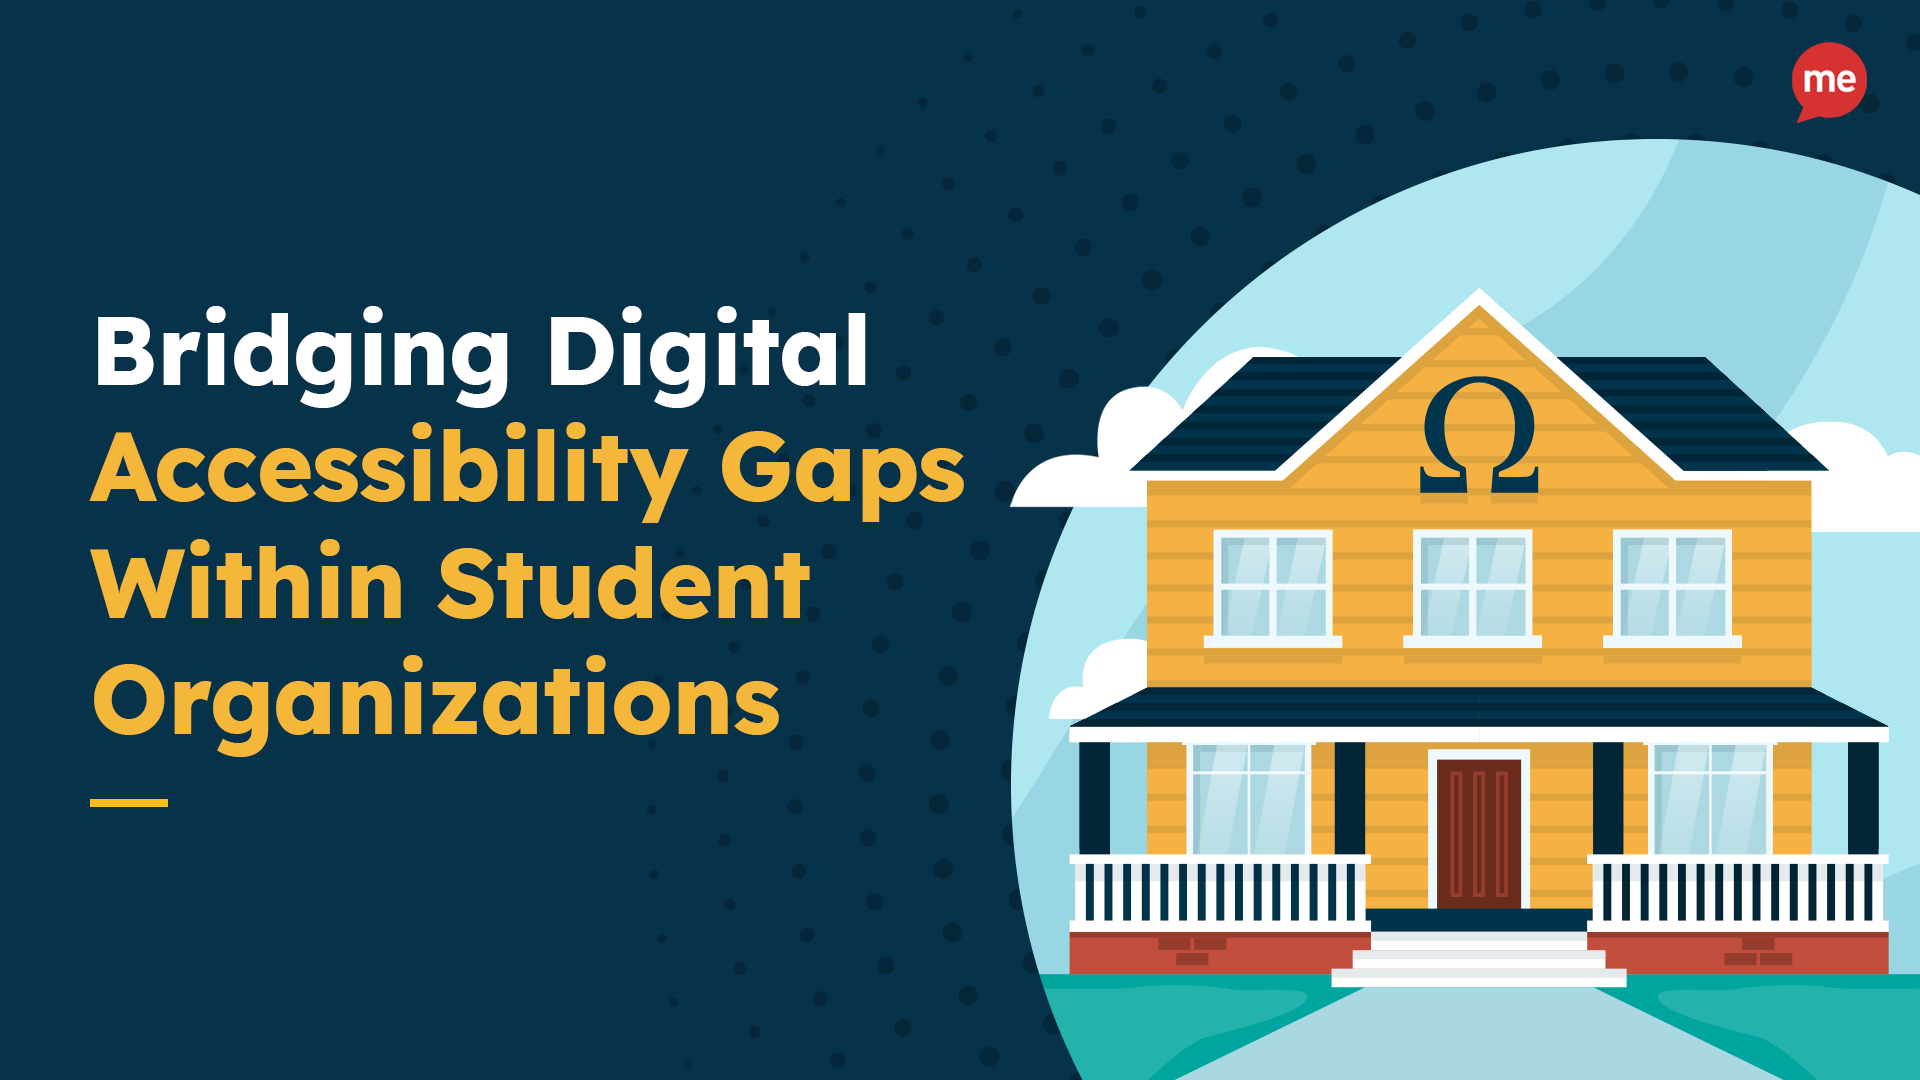 Bridging Digital Accessibility Gaps Within Student Organizations with an image of a yellow house with a fraternity symbol at the front of the house